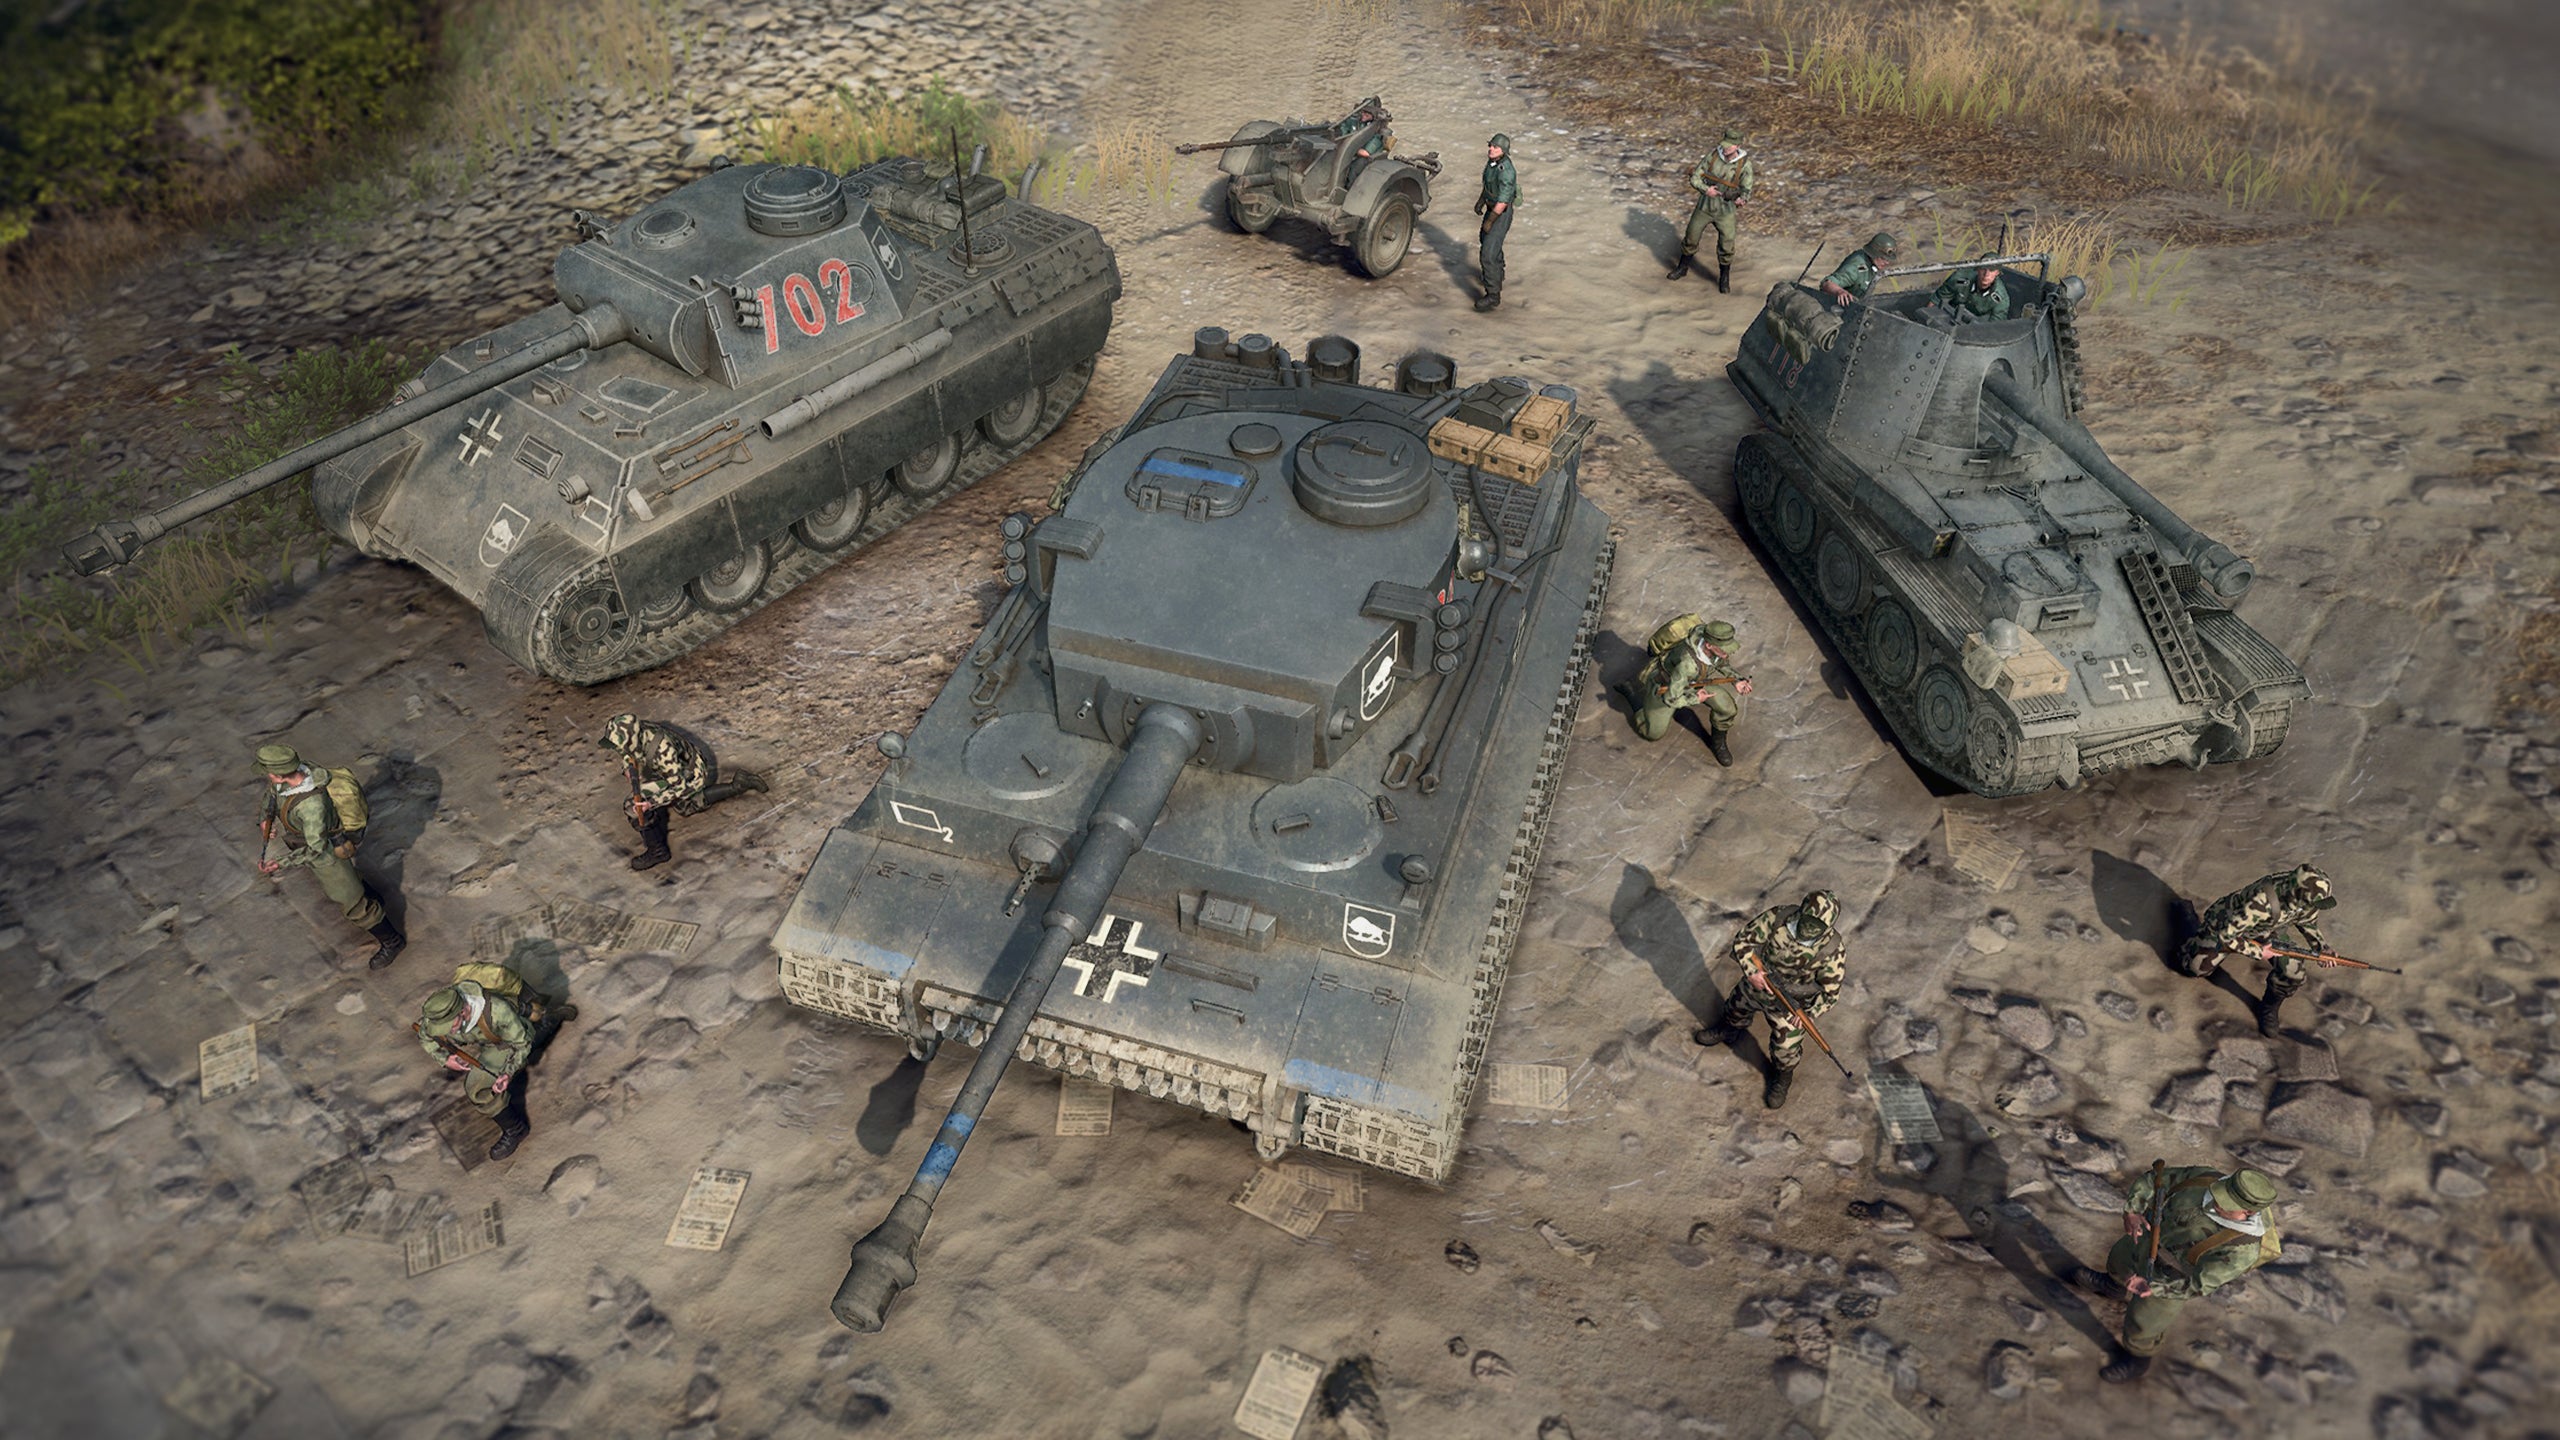 Company of Heroes 3 preview - view of three Wehrmacht vehicles, artillery and some units